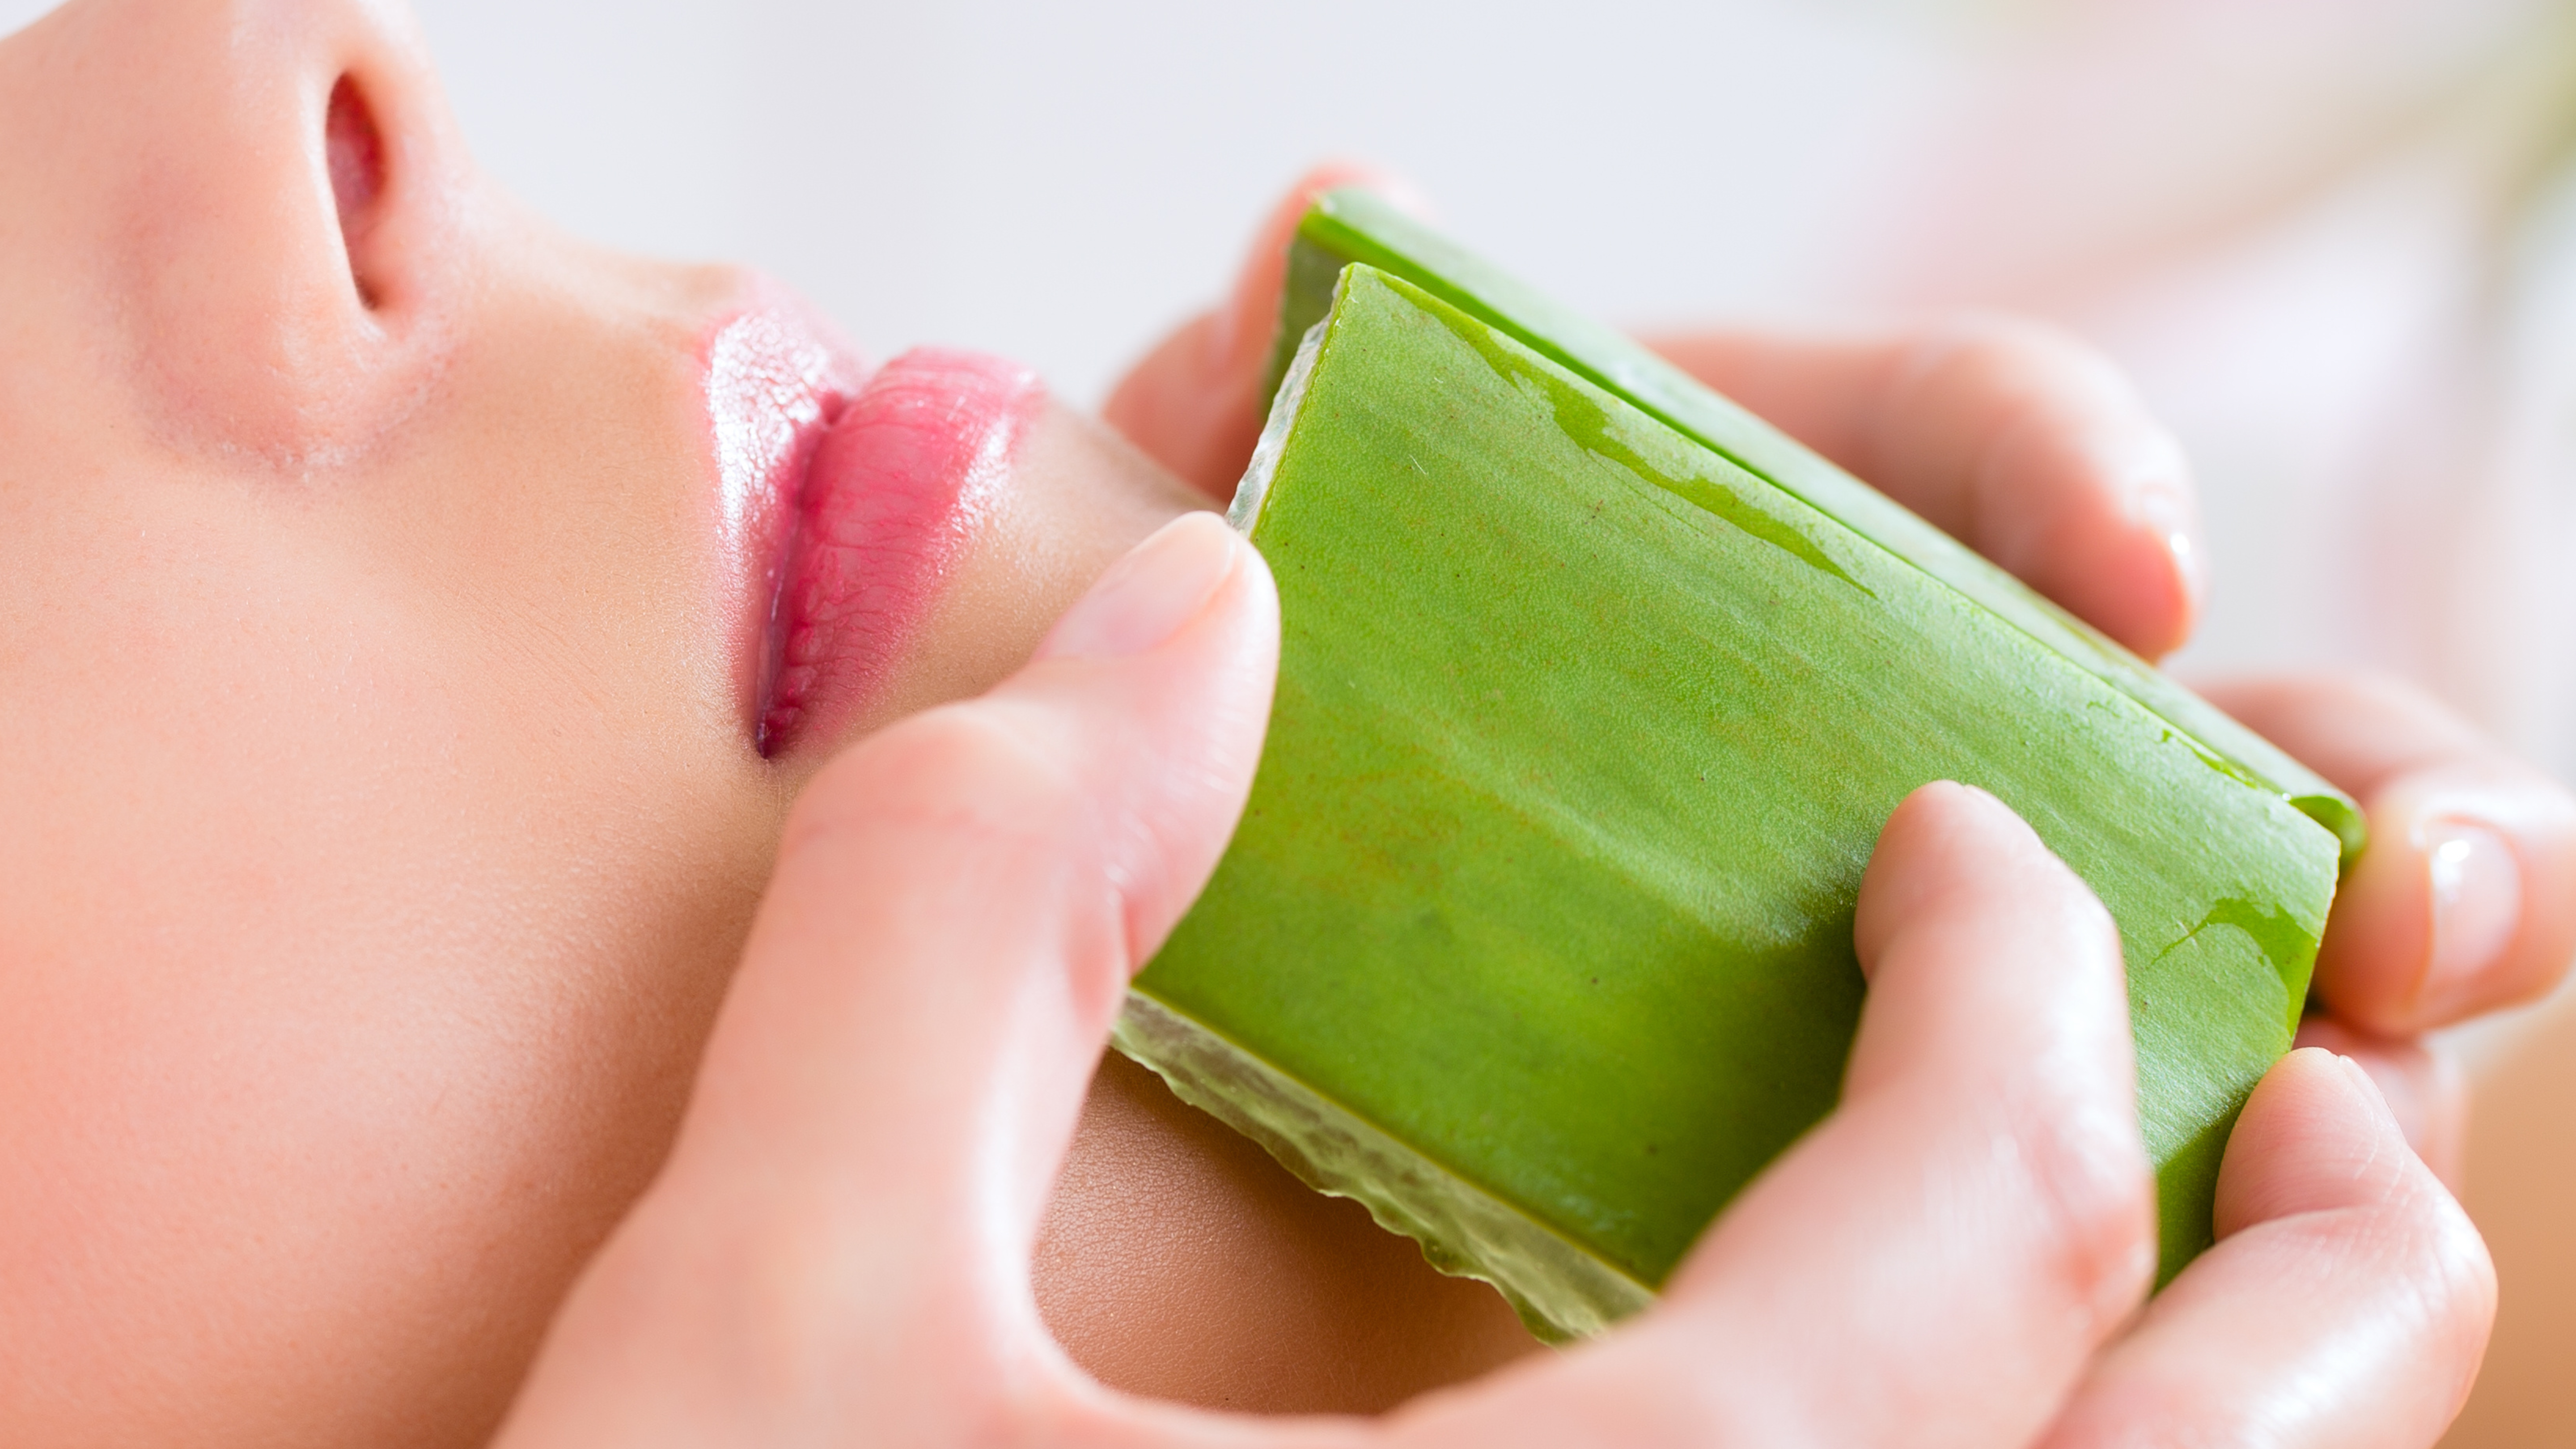 CA15. 9 aloe vera benefits for face and skin